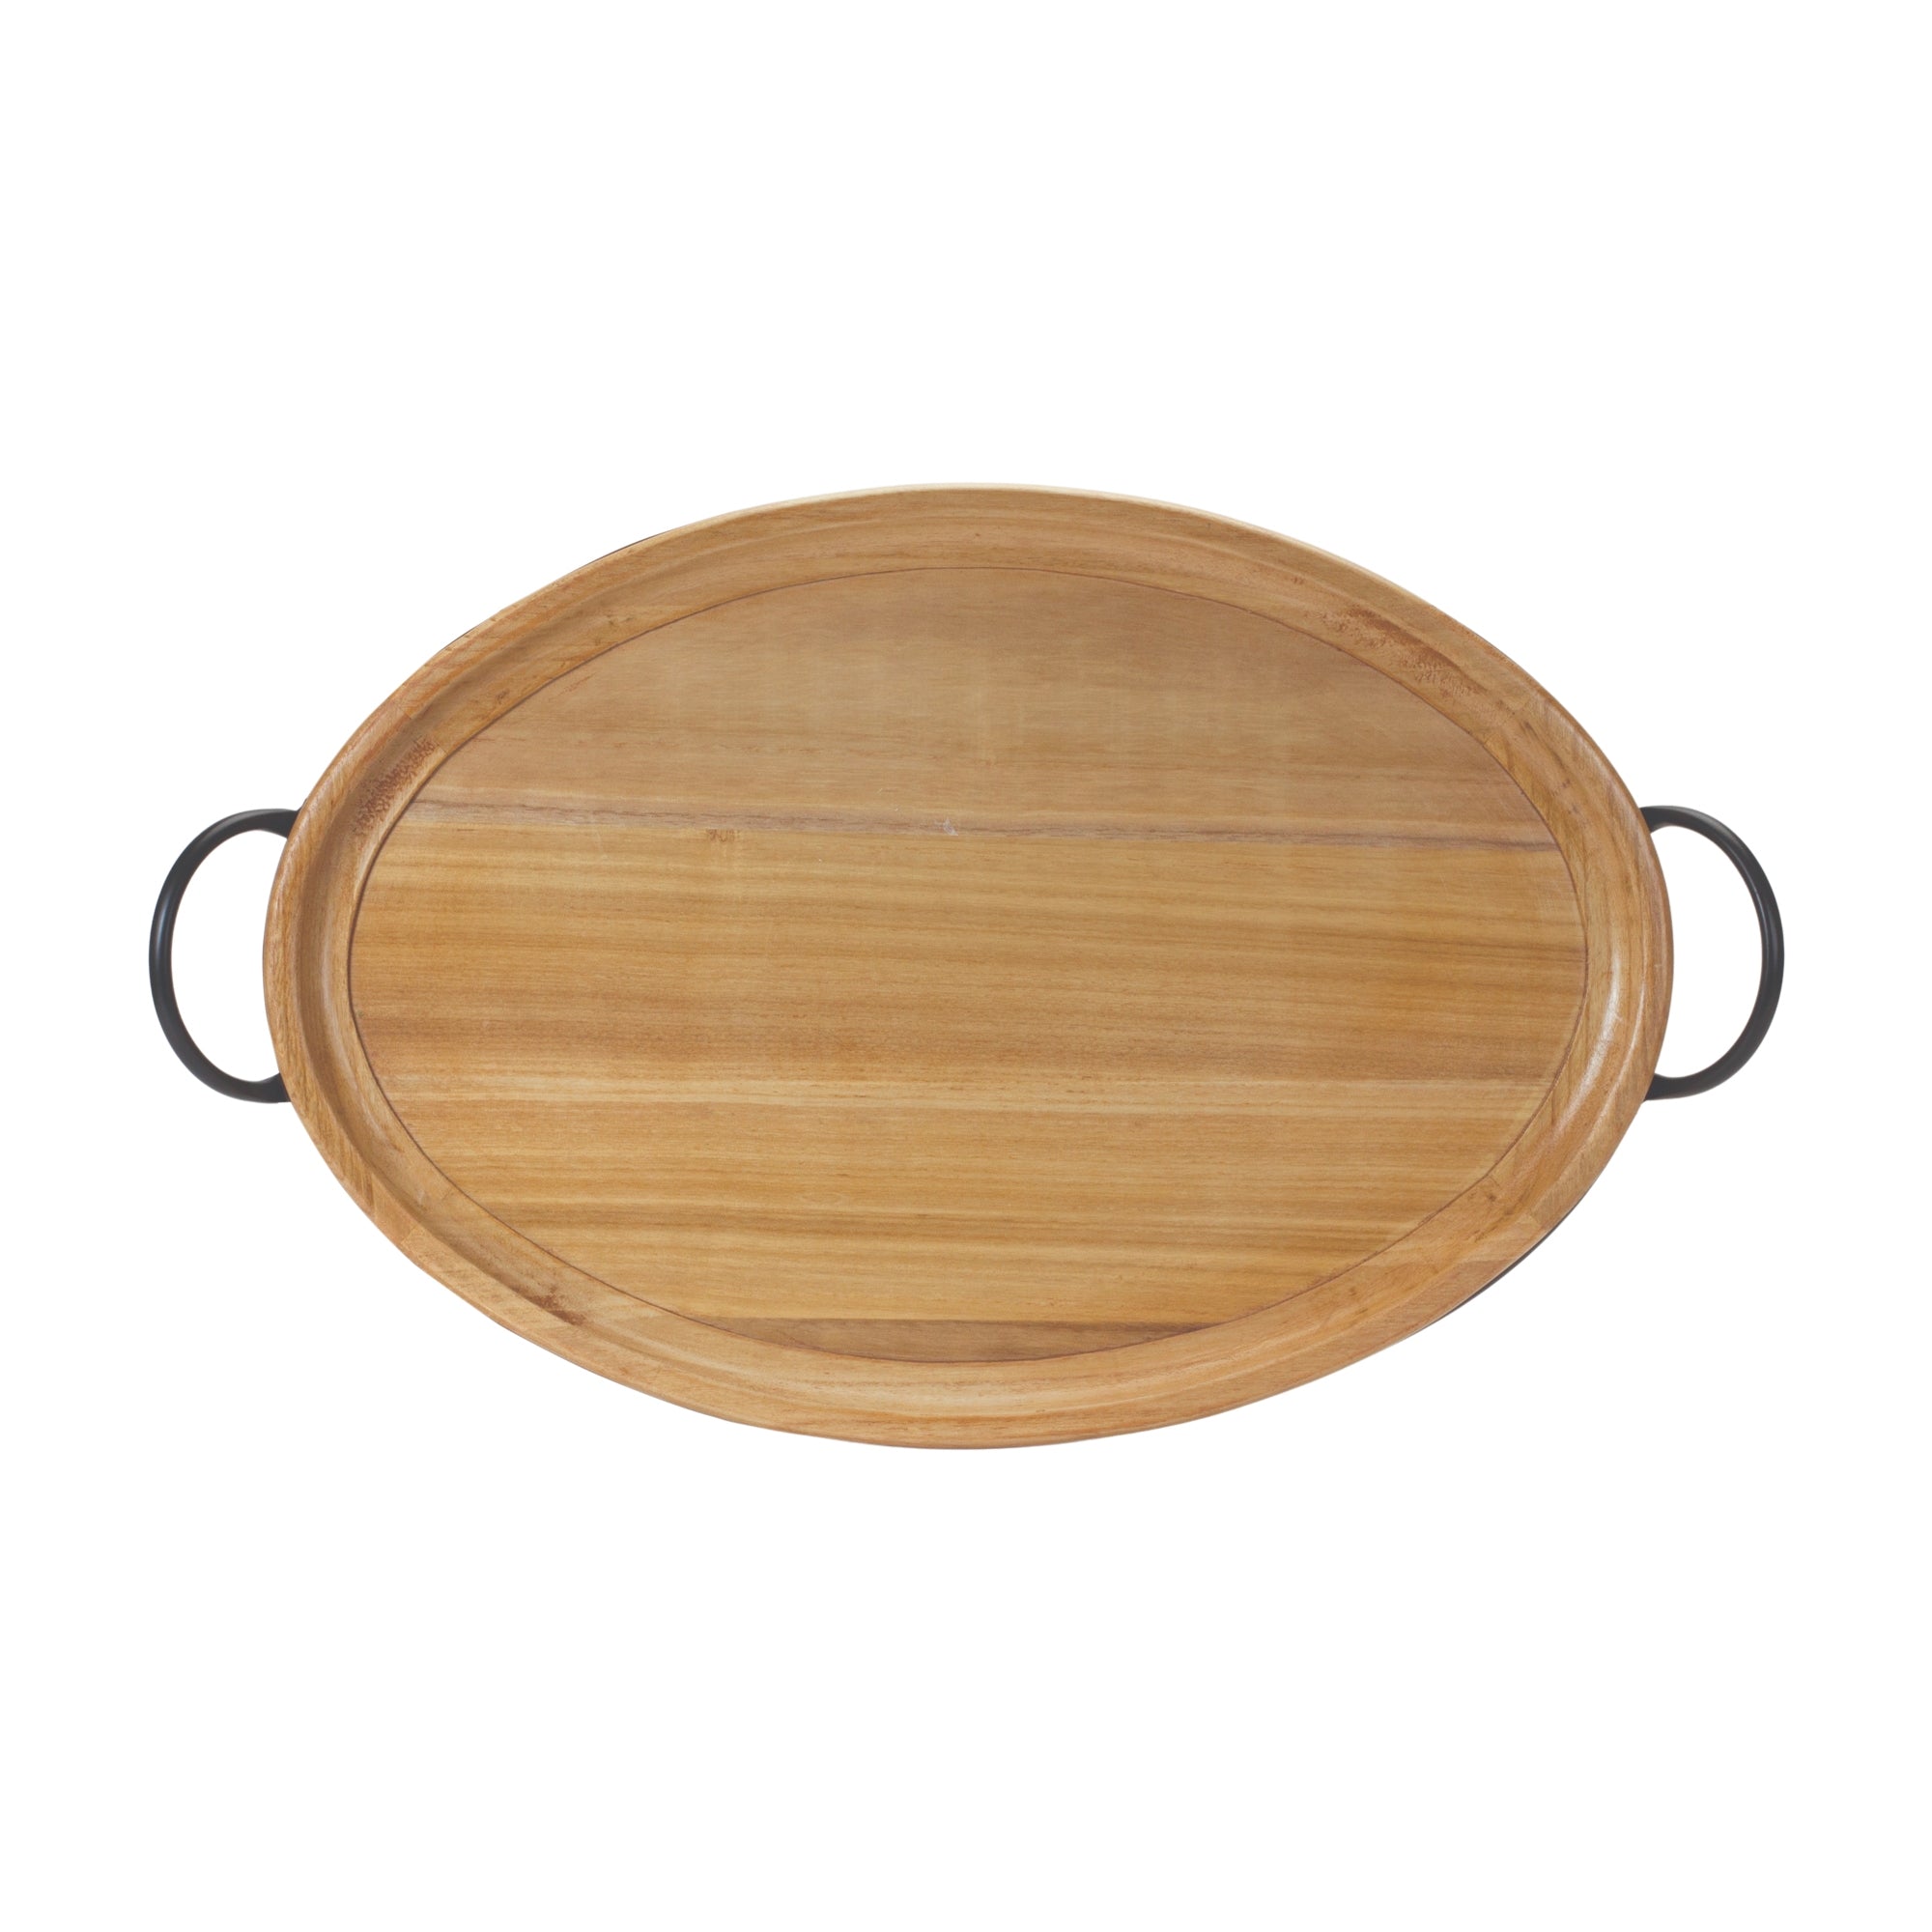 Natural Wood Tray with Handles 27.5"L